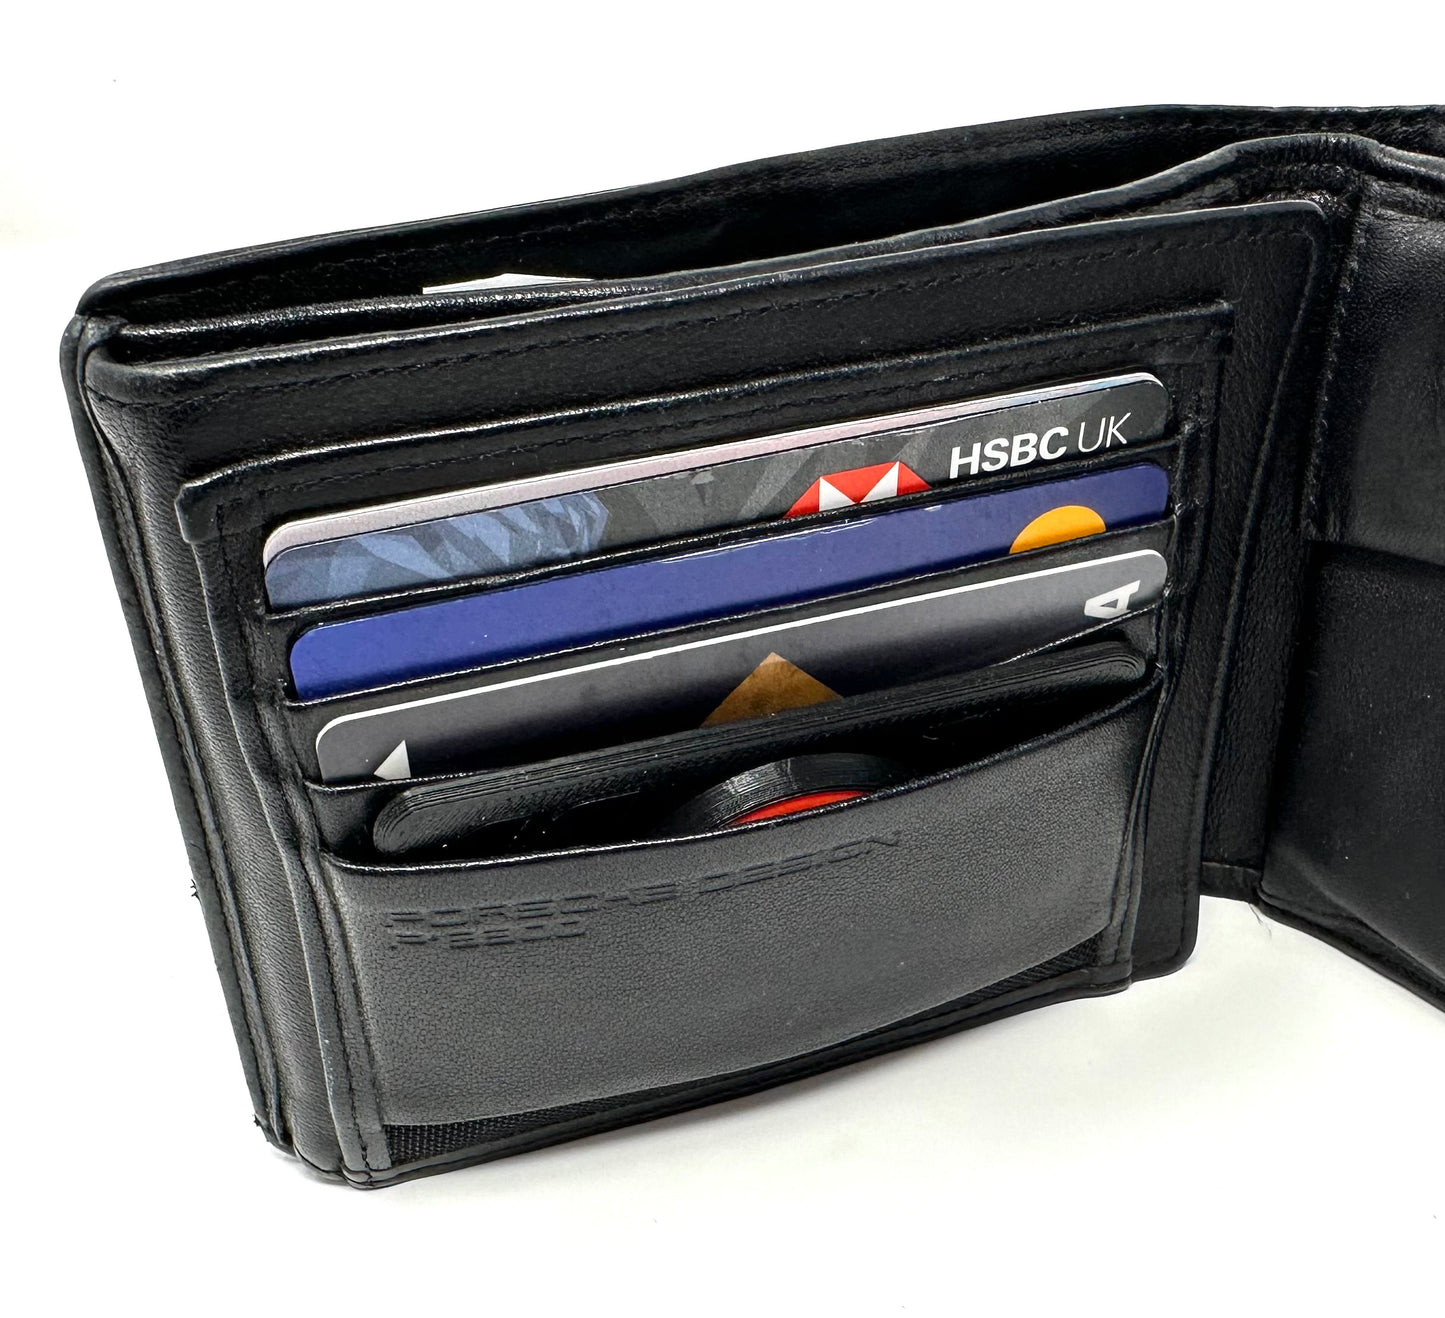 Chipolo One Spot Credit Card Sized Wallet/Purse/Clutch Bag Holder